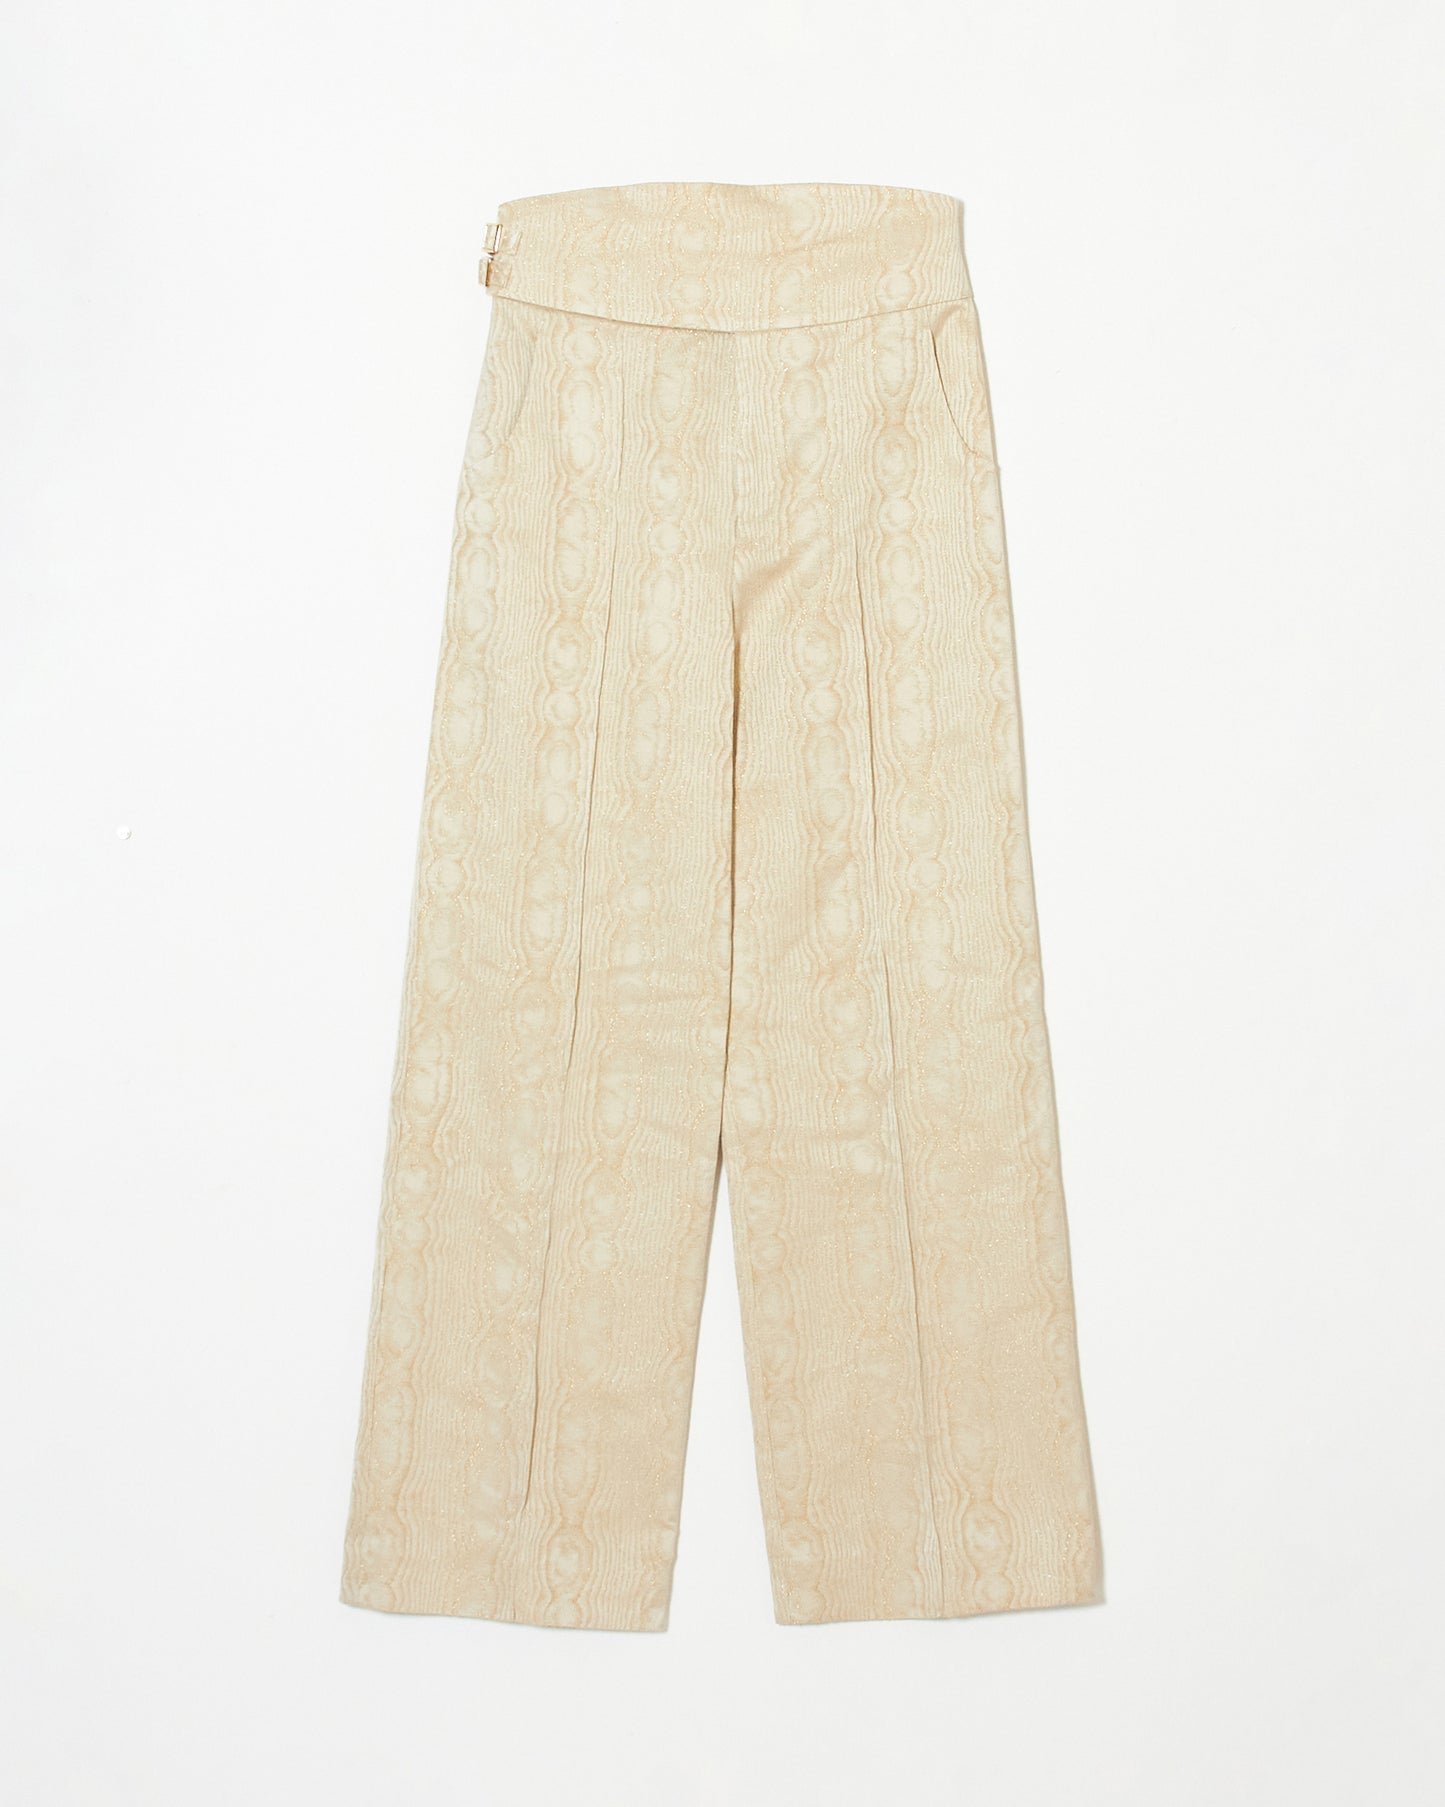 champagne gold moire pants【Delivery in March 2023】